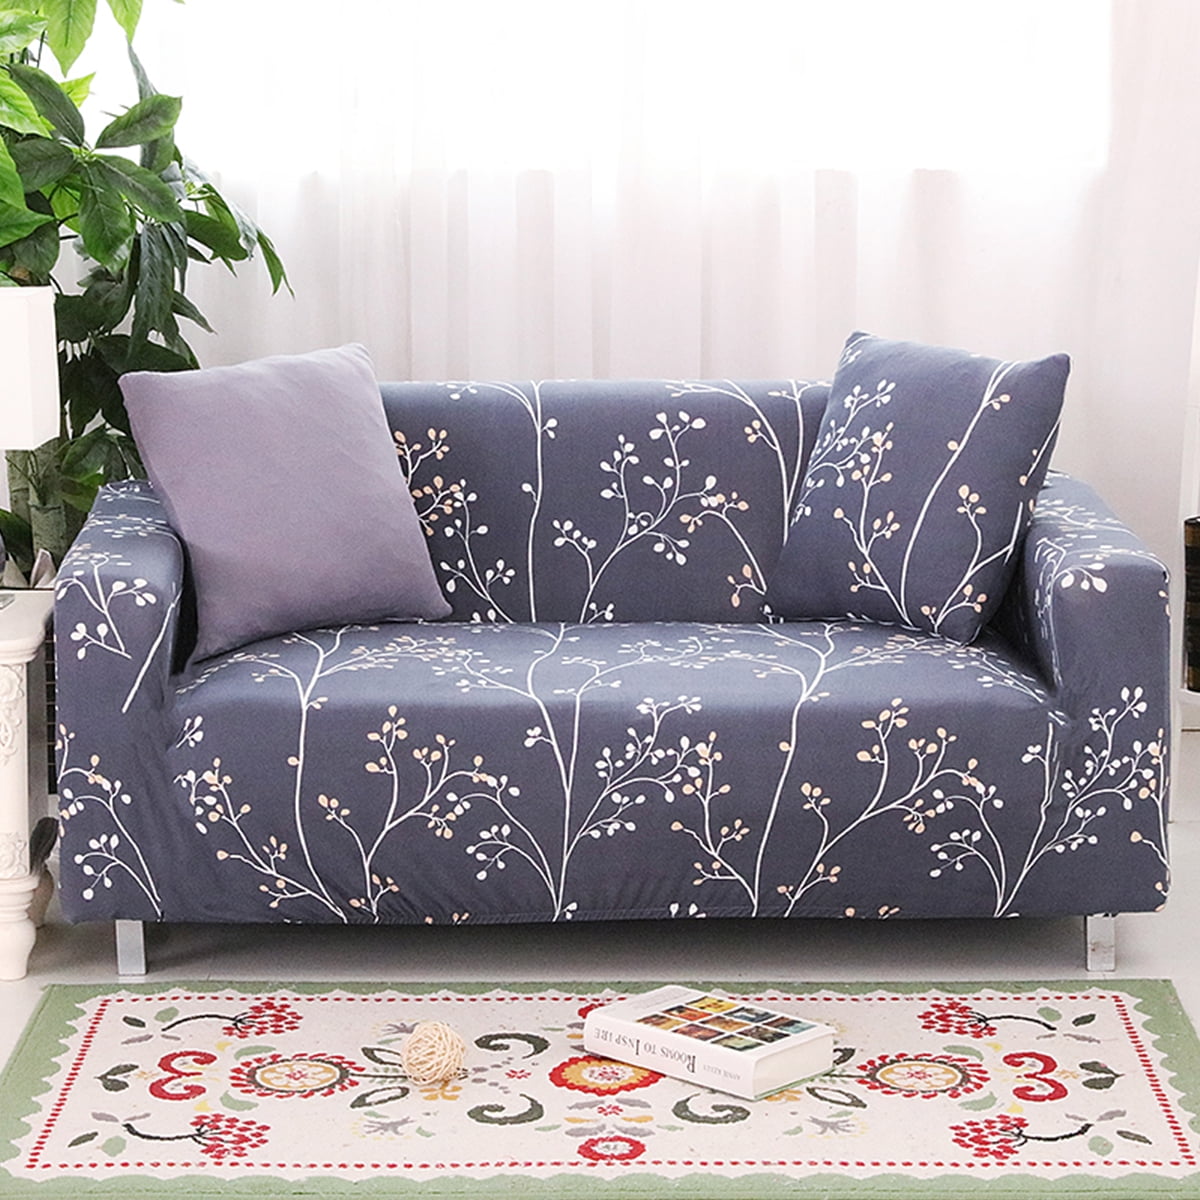 Details about   Universal  Energy Stretch Sofa Cover Lounge Couch Slipcover Recliner Protector 